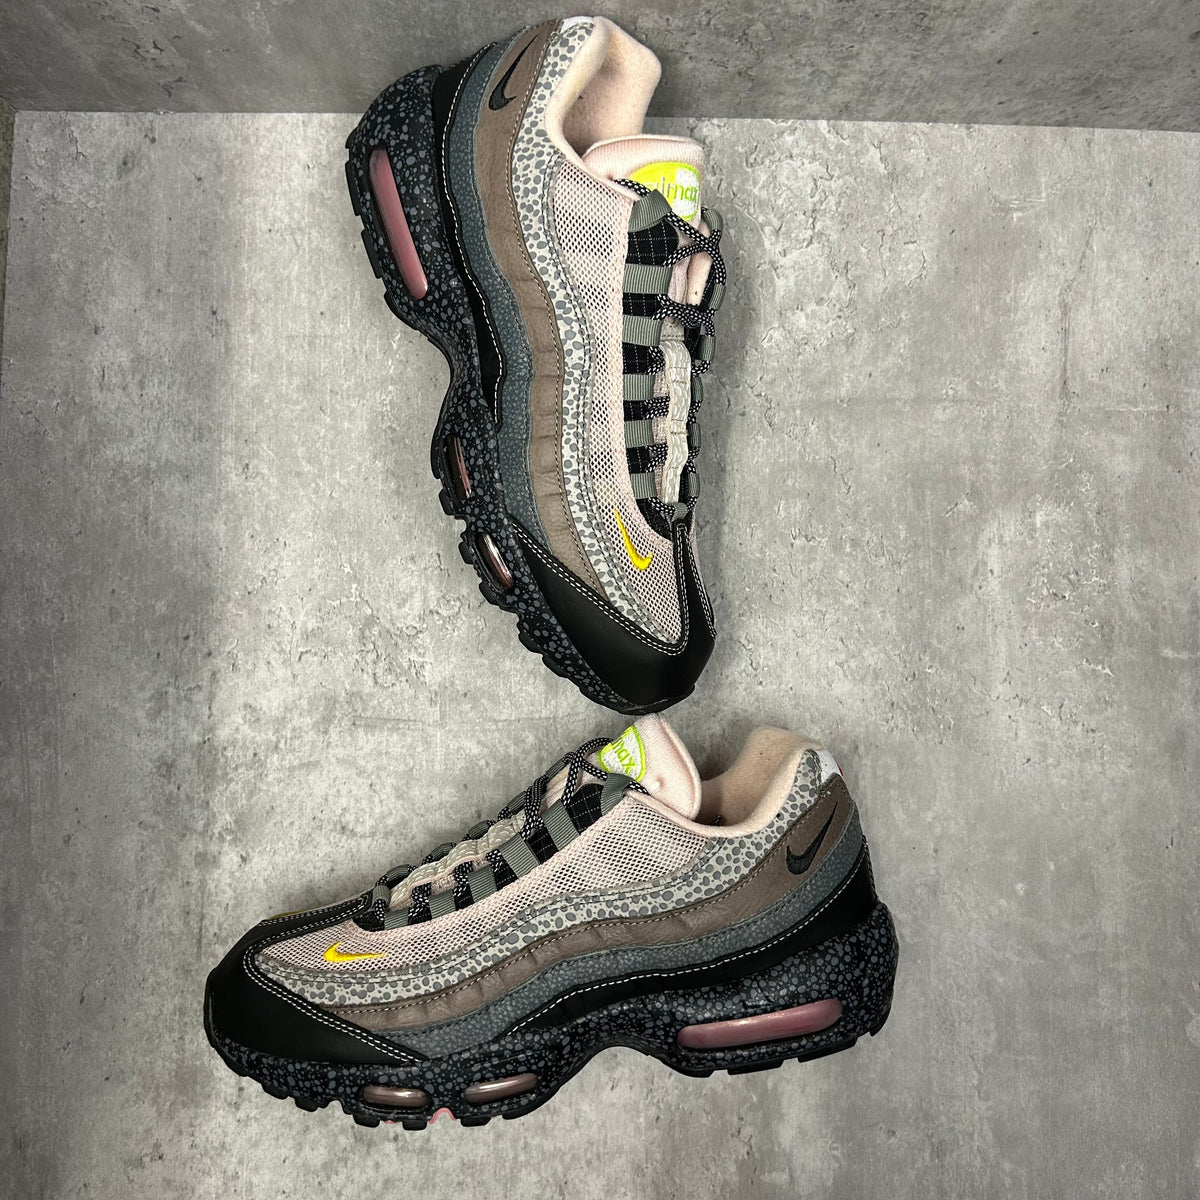 Nike Airmax 95 Size 20 for 20